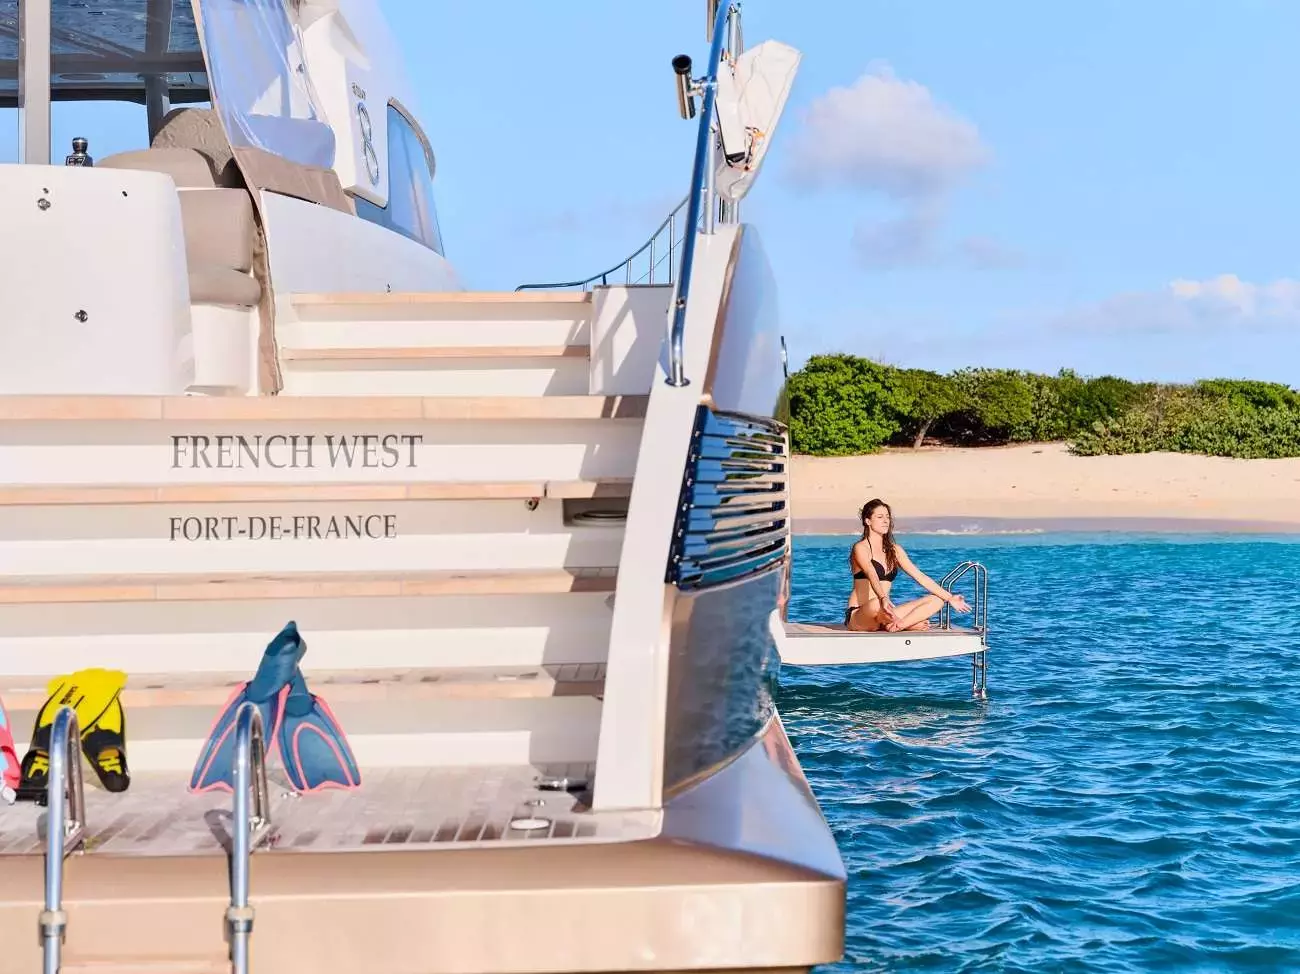 Frenchwest by Lagoon - Top rates for a Rental of a private Power Catamaran in Grenada